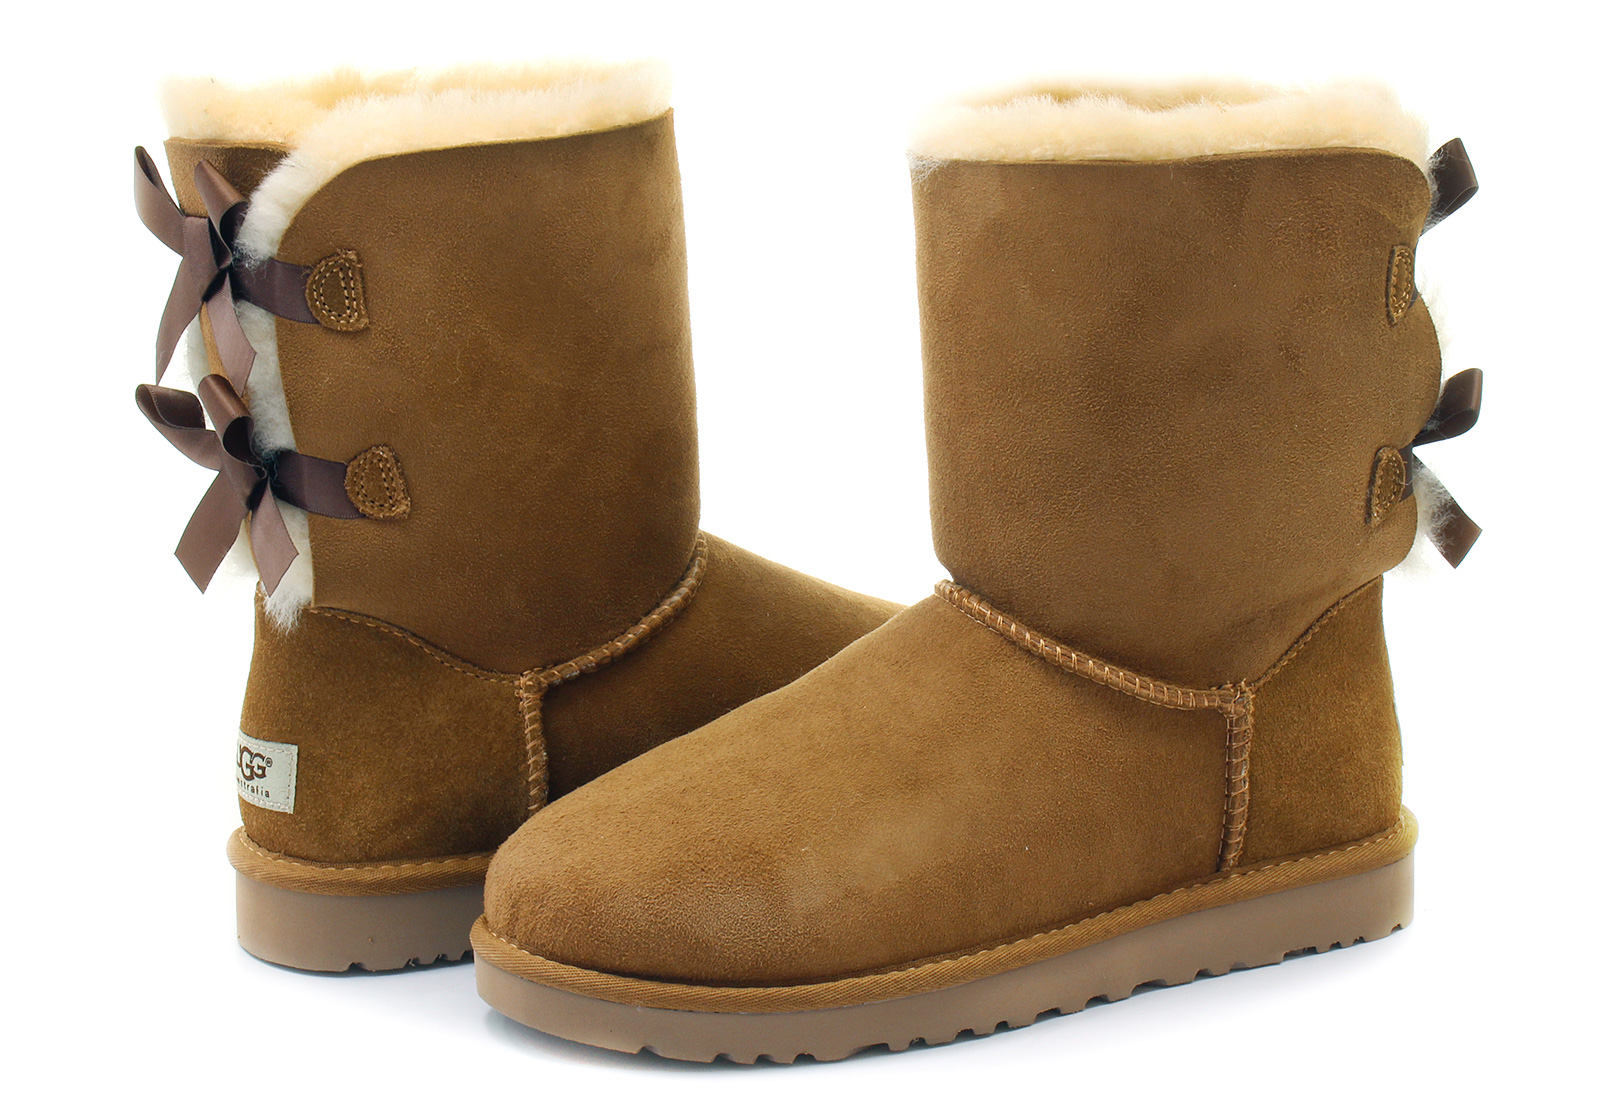 Light Brown Bailey Bow Uggs - Ugg Bailey Bow Boot Women Bow Boots Ugg Boots...